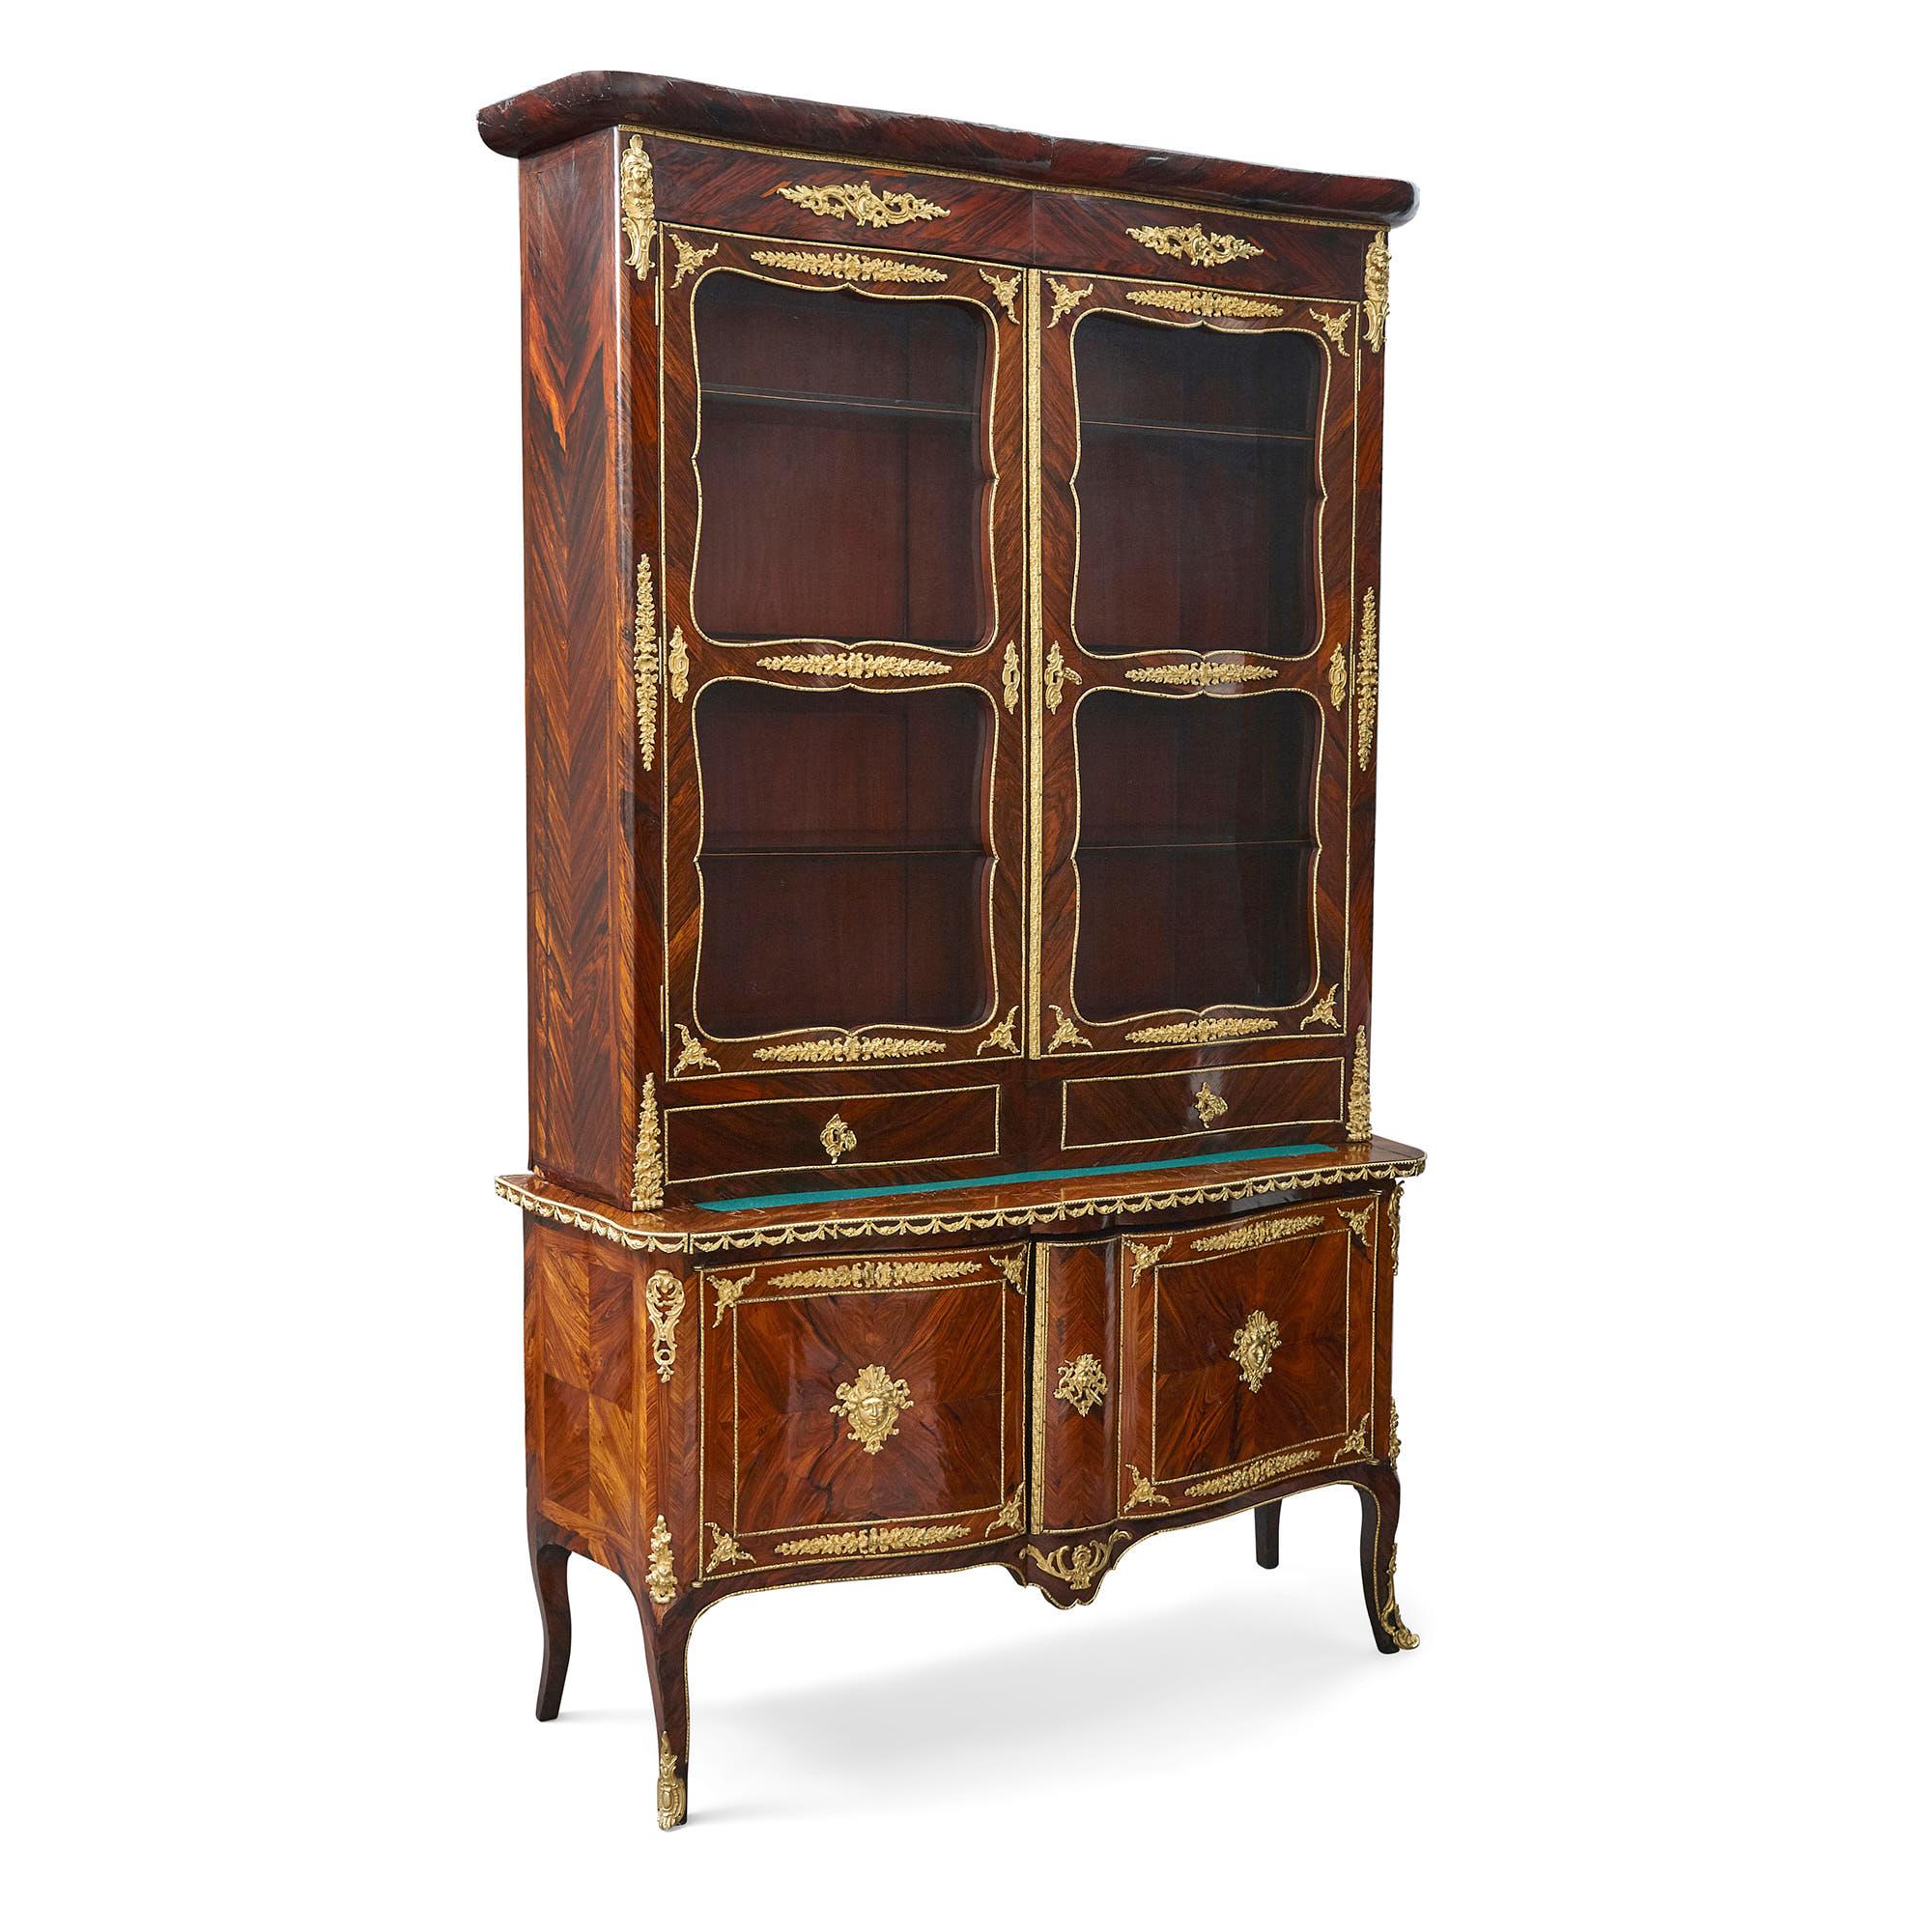 Second Empire period gilt bronze and kingwood display cabinet
French, c. 1860
Measures: Height 218cm, width 128cm, depth 42cm

This fine display cabinet, dating from the Napoleon III period, is luxuriously crafted from kingwood mounted with gilt